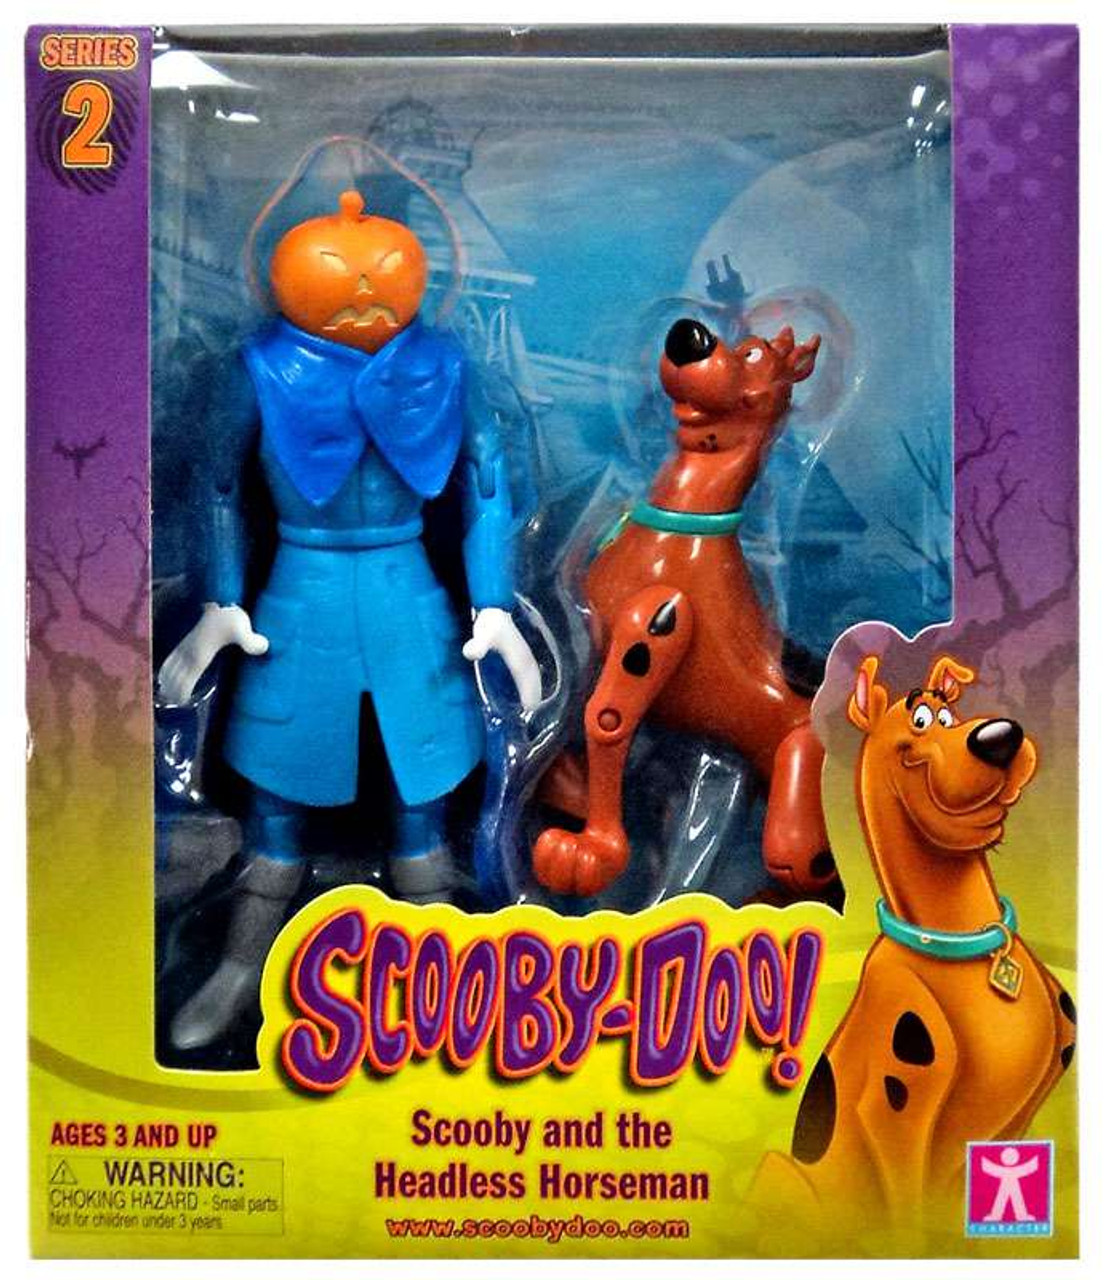 Scooby Doo Series 2 Scooby And The Headless Horseman Action Figure 2 Pack Zoink Toywiz - roblox headless horseman toy code